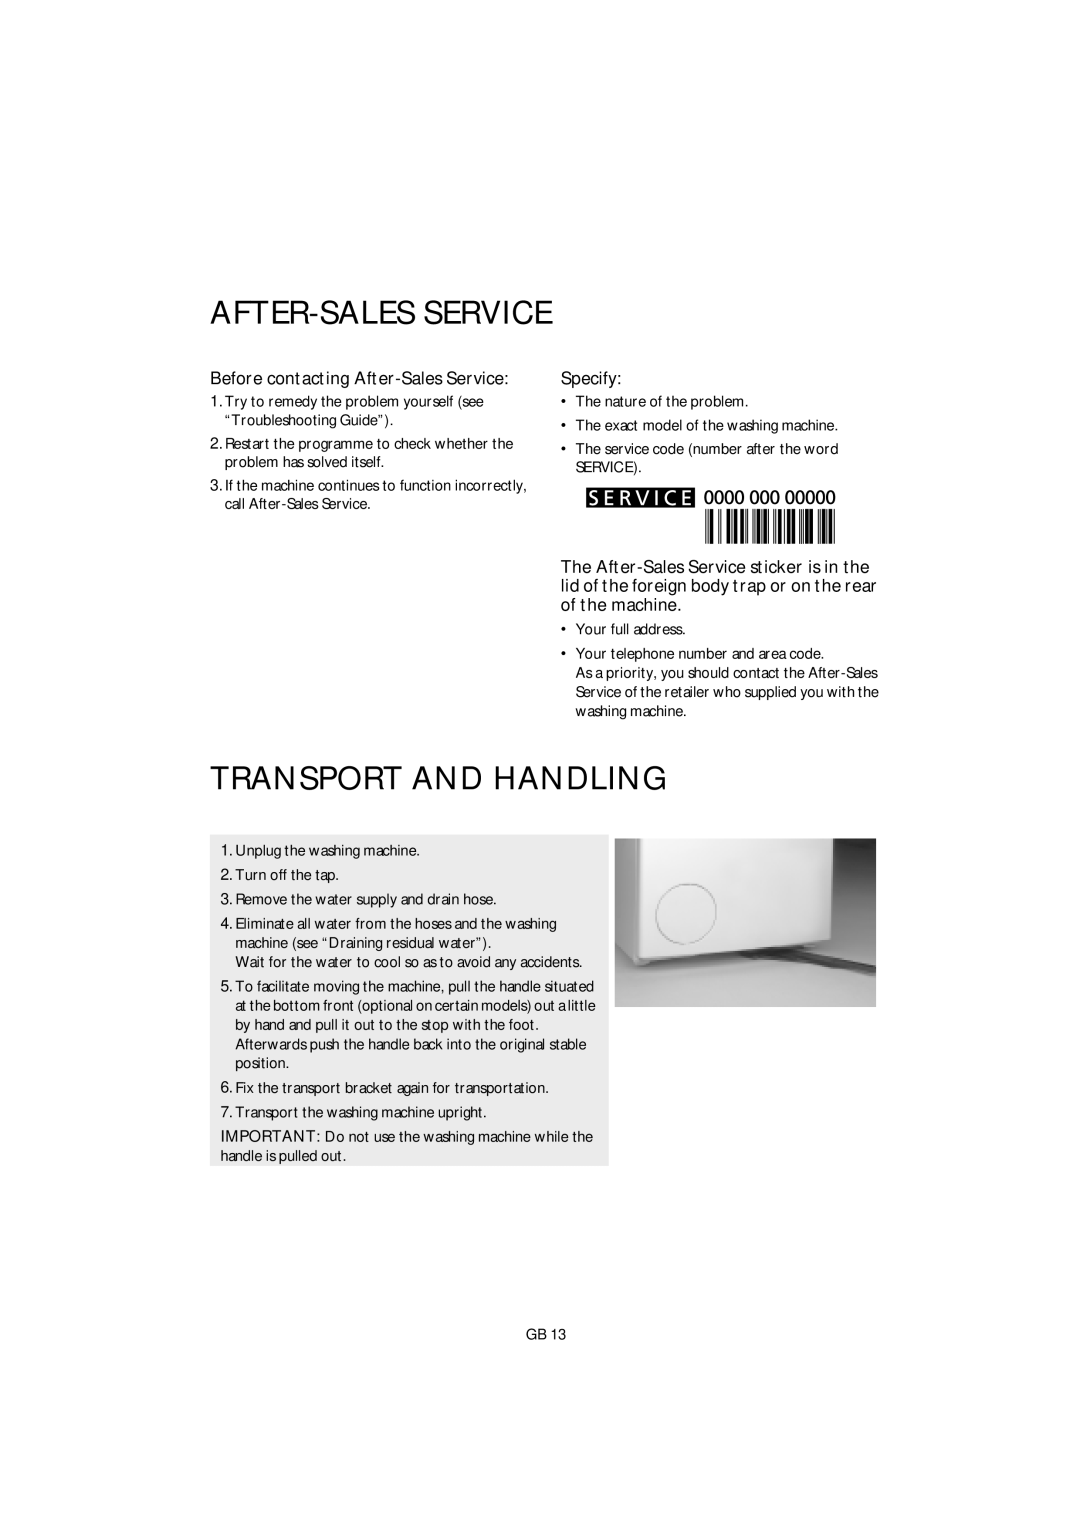 Smeg GB ST L80 manual Transport And Handling, Before contacting After-Sales Service, Specify 